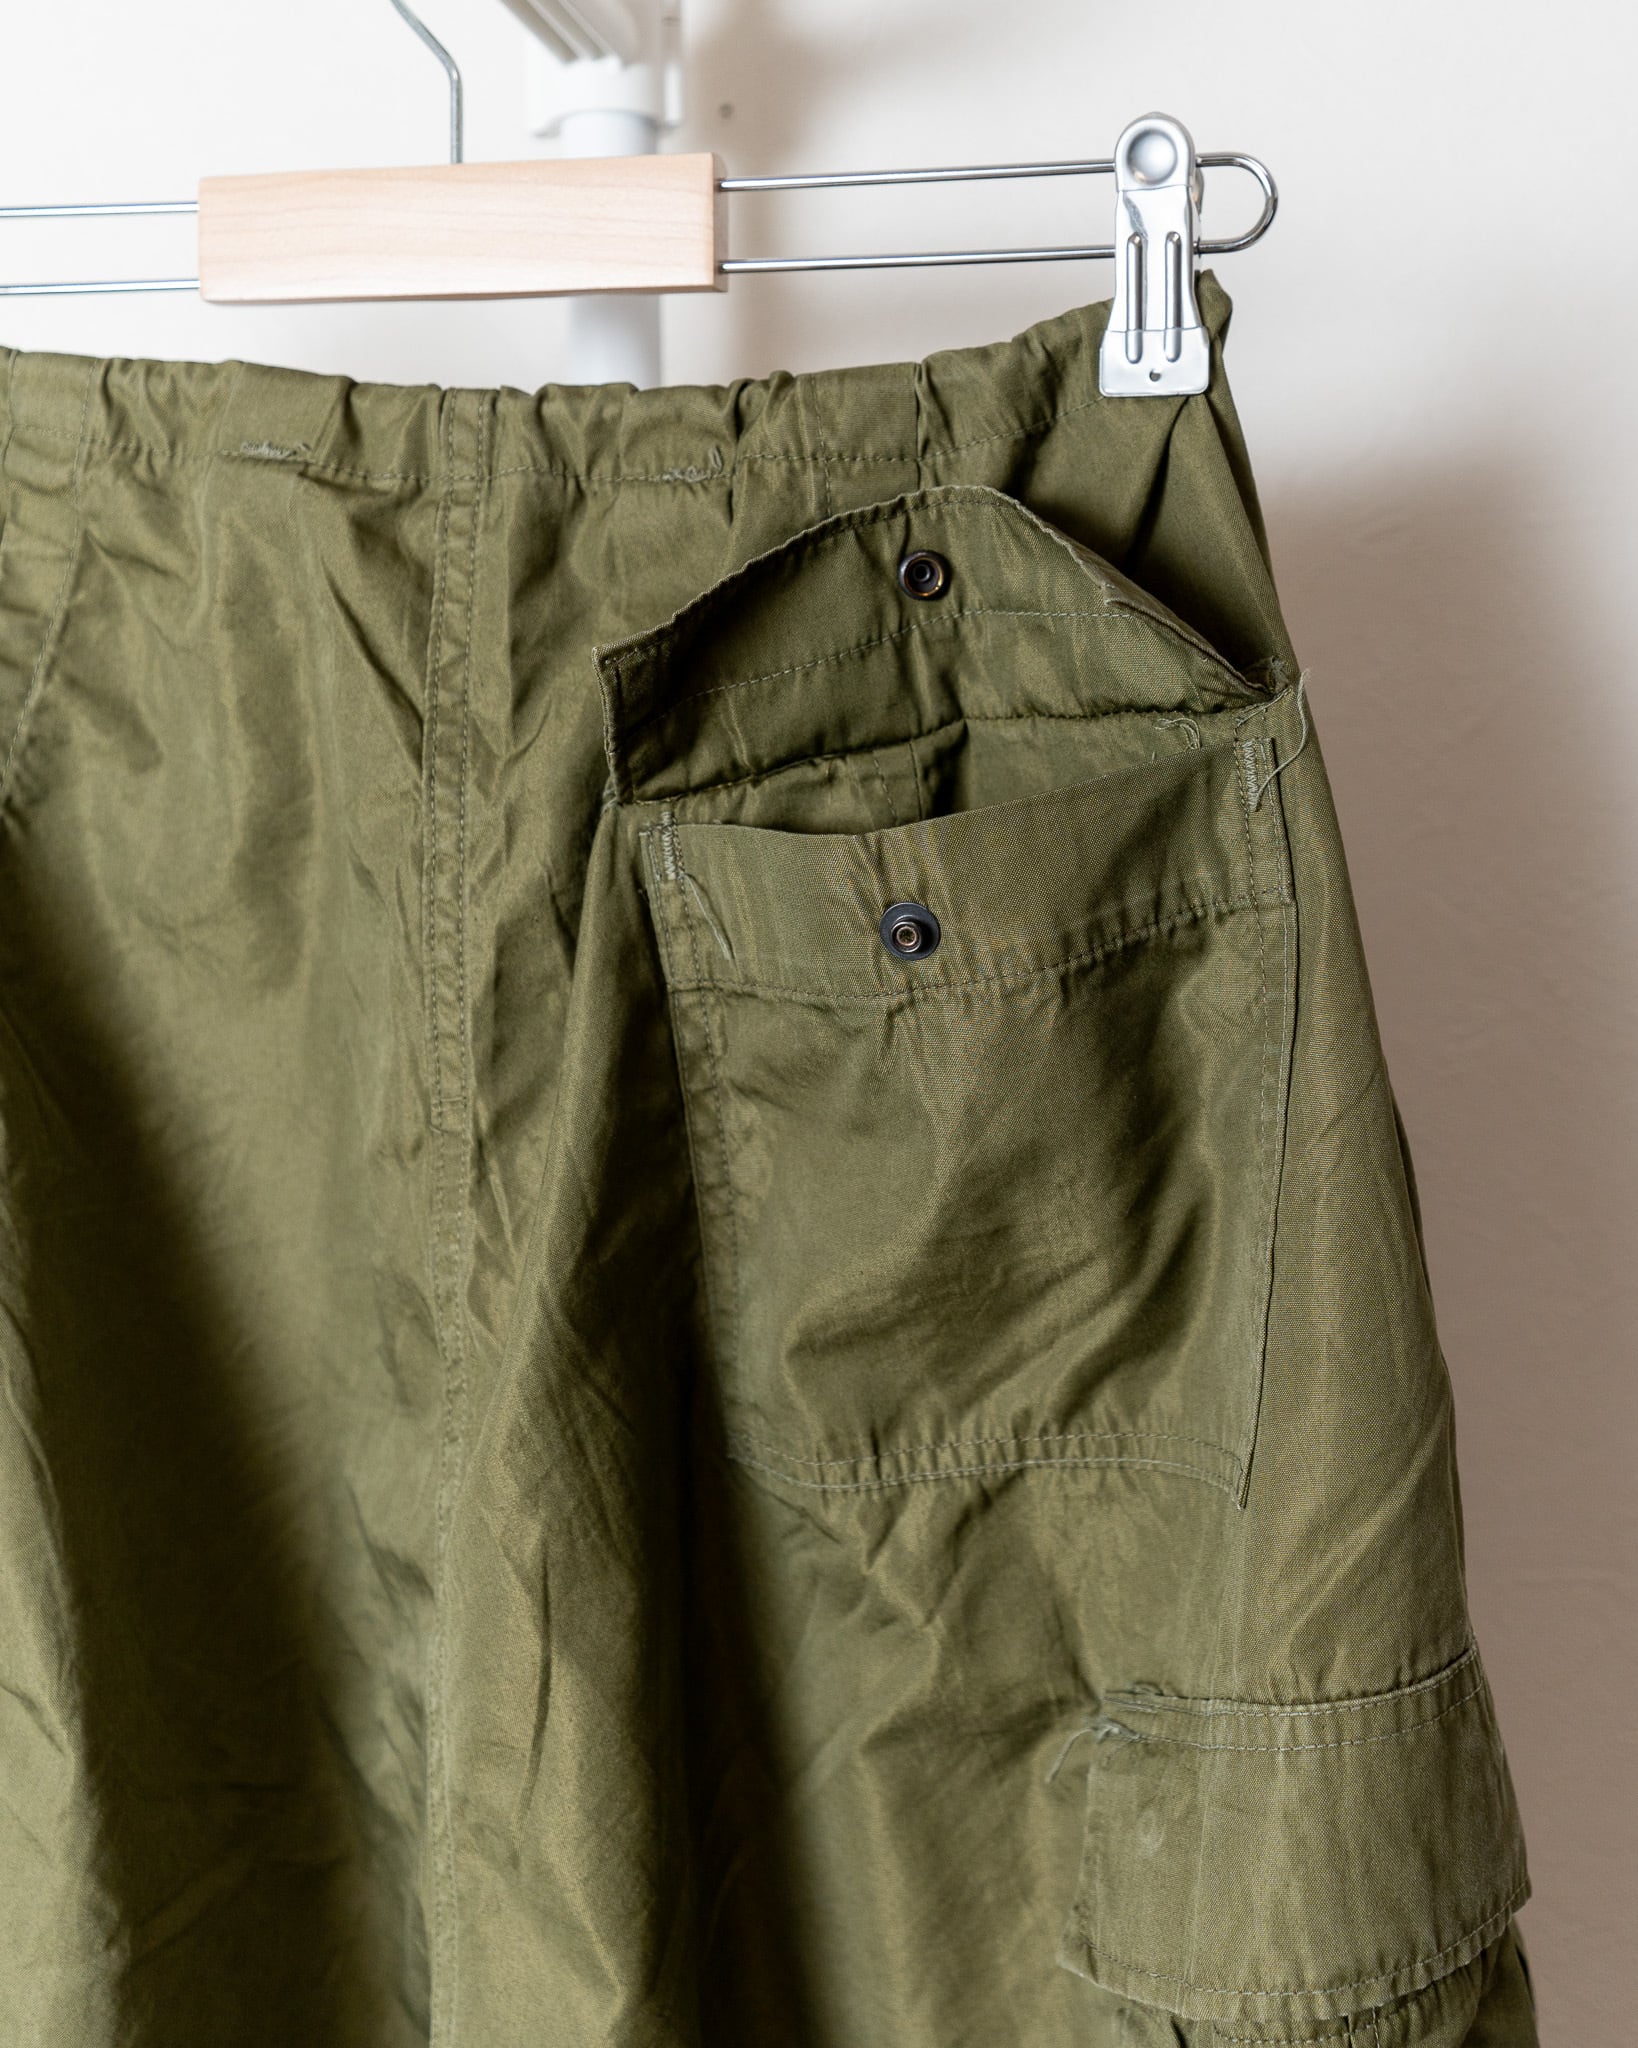 M RU.S.Army M Over Pants "DEADSTOCK" 実物 アメリカ軍 M